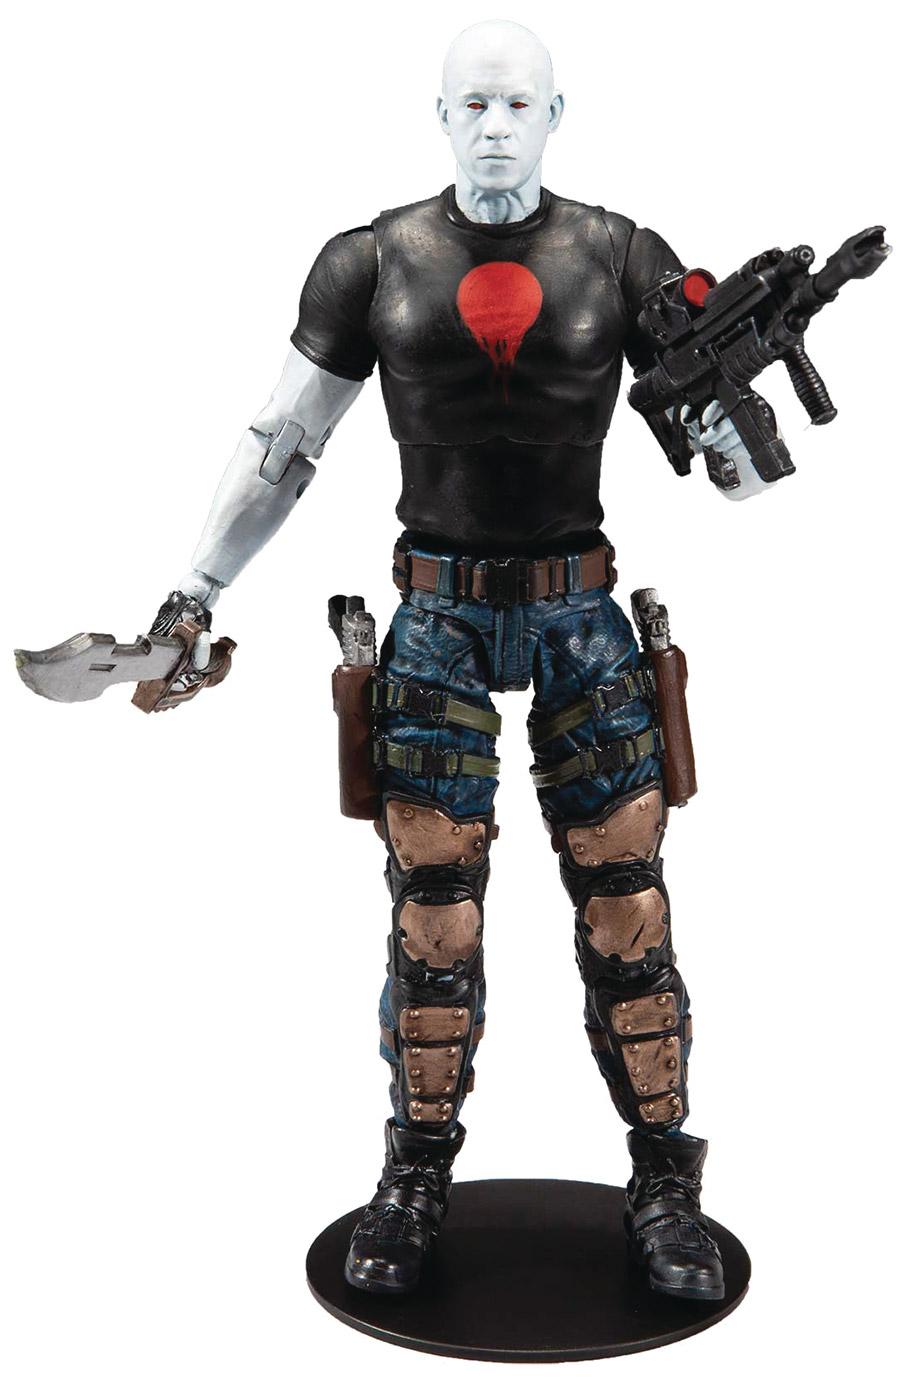 Vin Diesel's Bloodshot Immortalized as New Action Figure